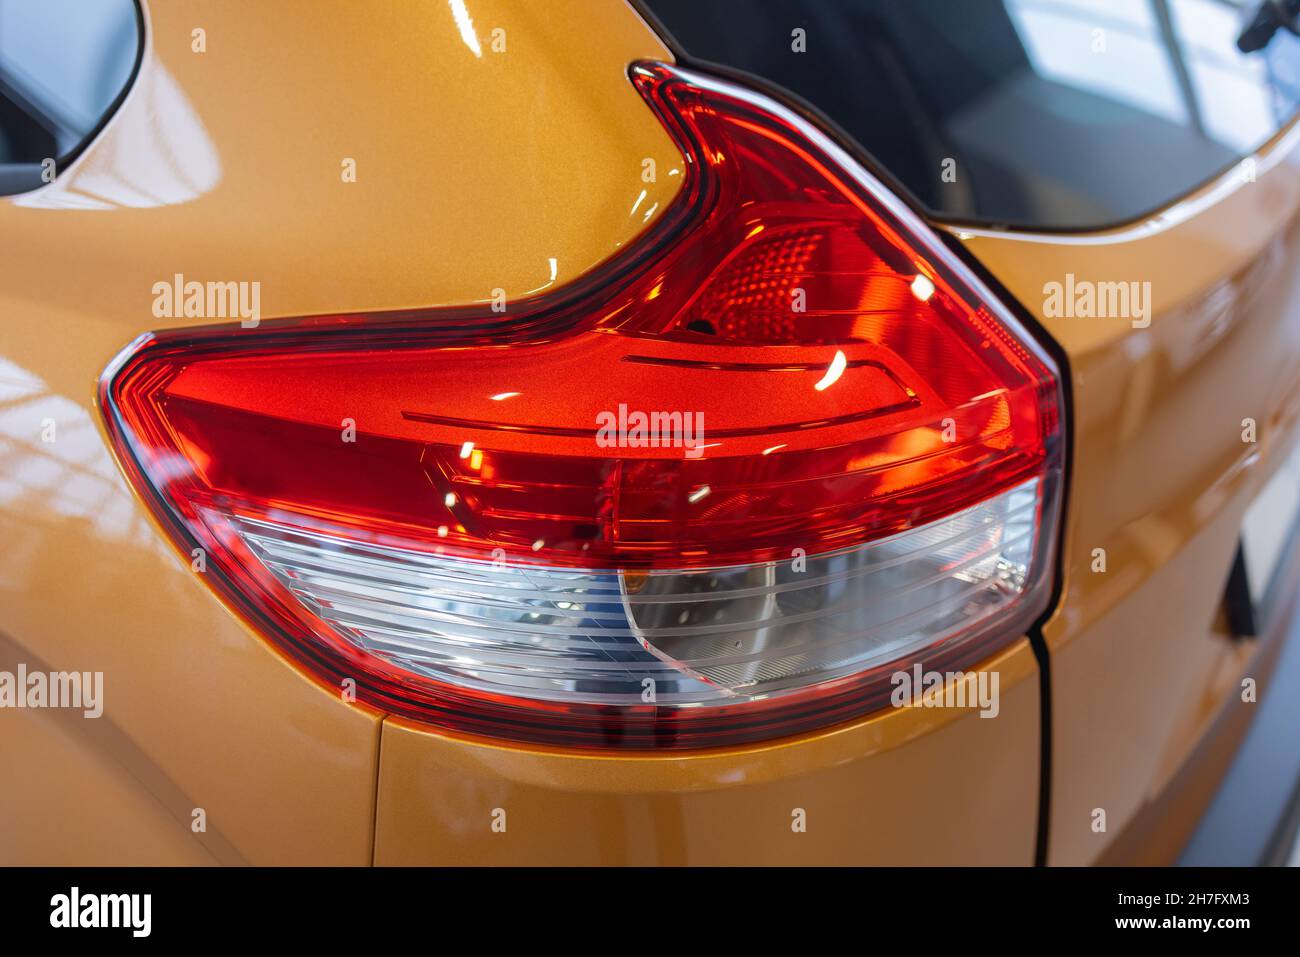 Closeup of rear light of orange Seat leon parked in the street Stock Photo